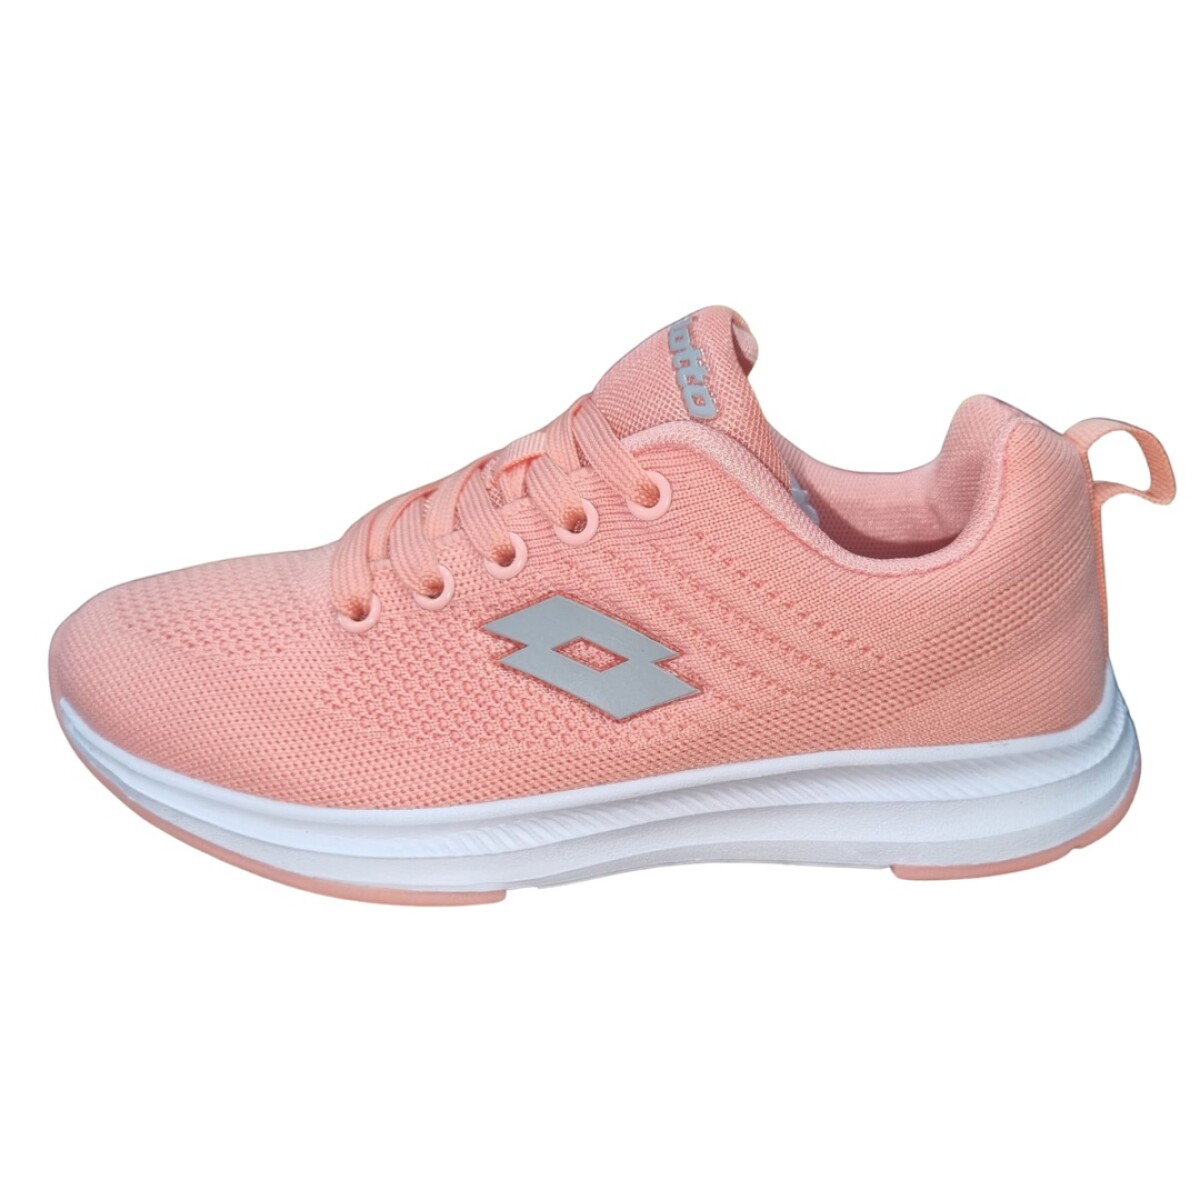 Champion Lotto Running Deportivo Mujer - Coral - S/C 